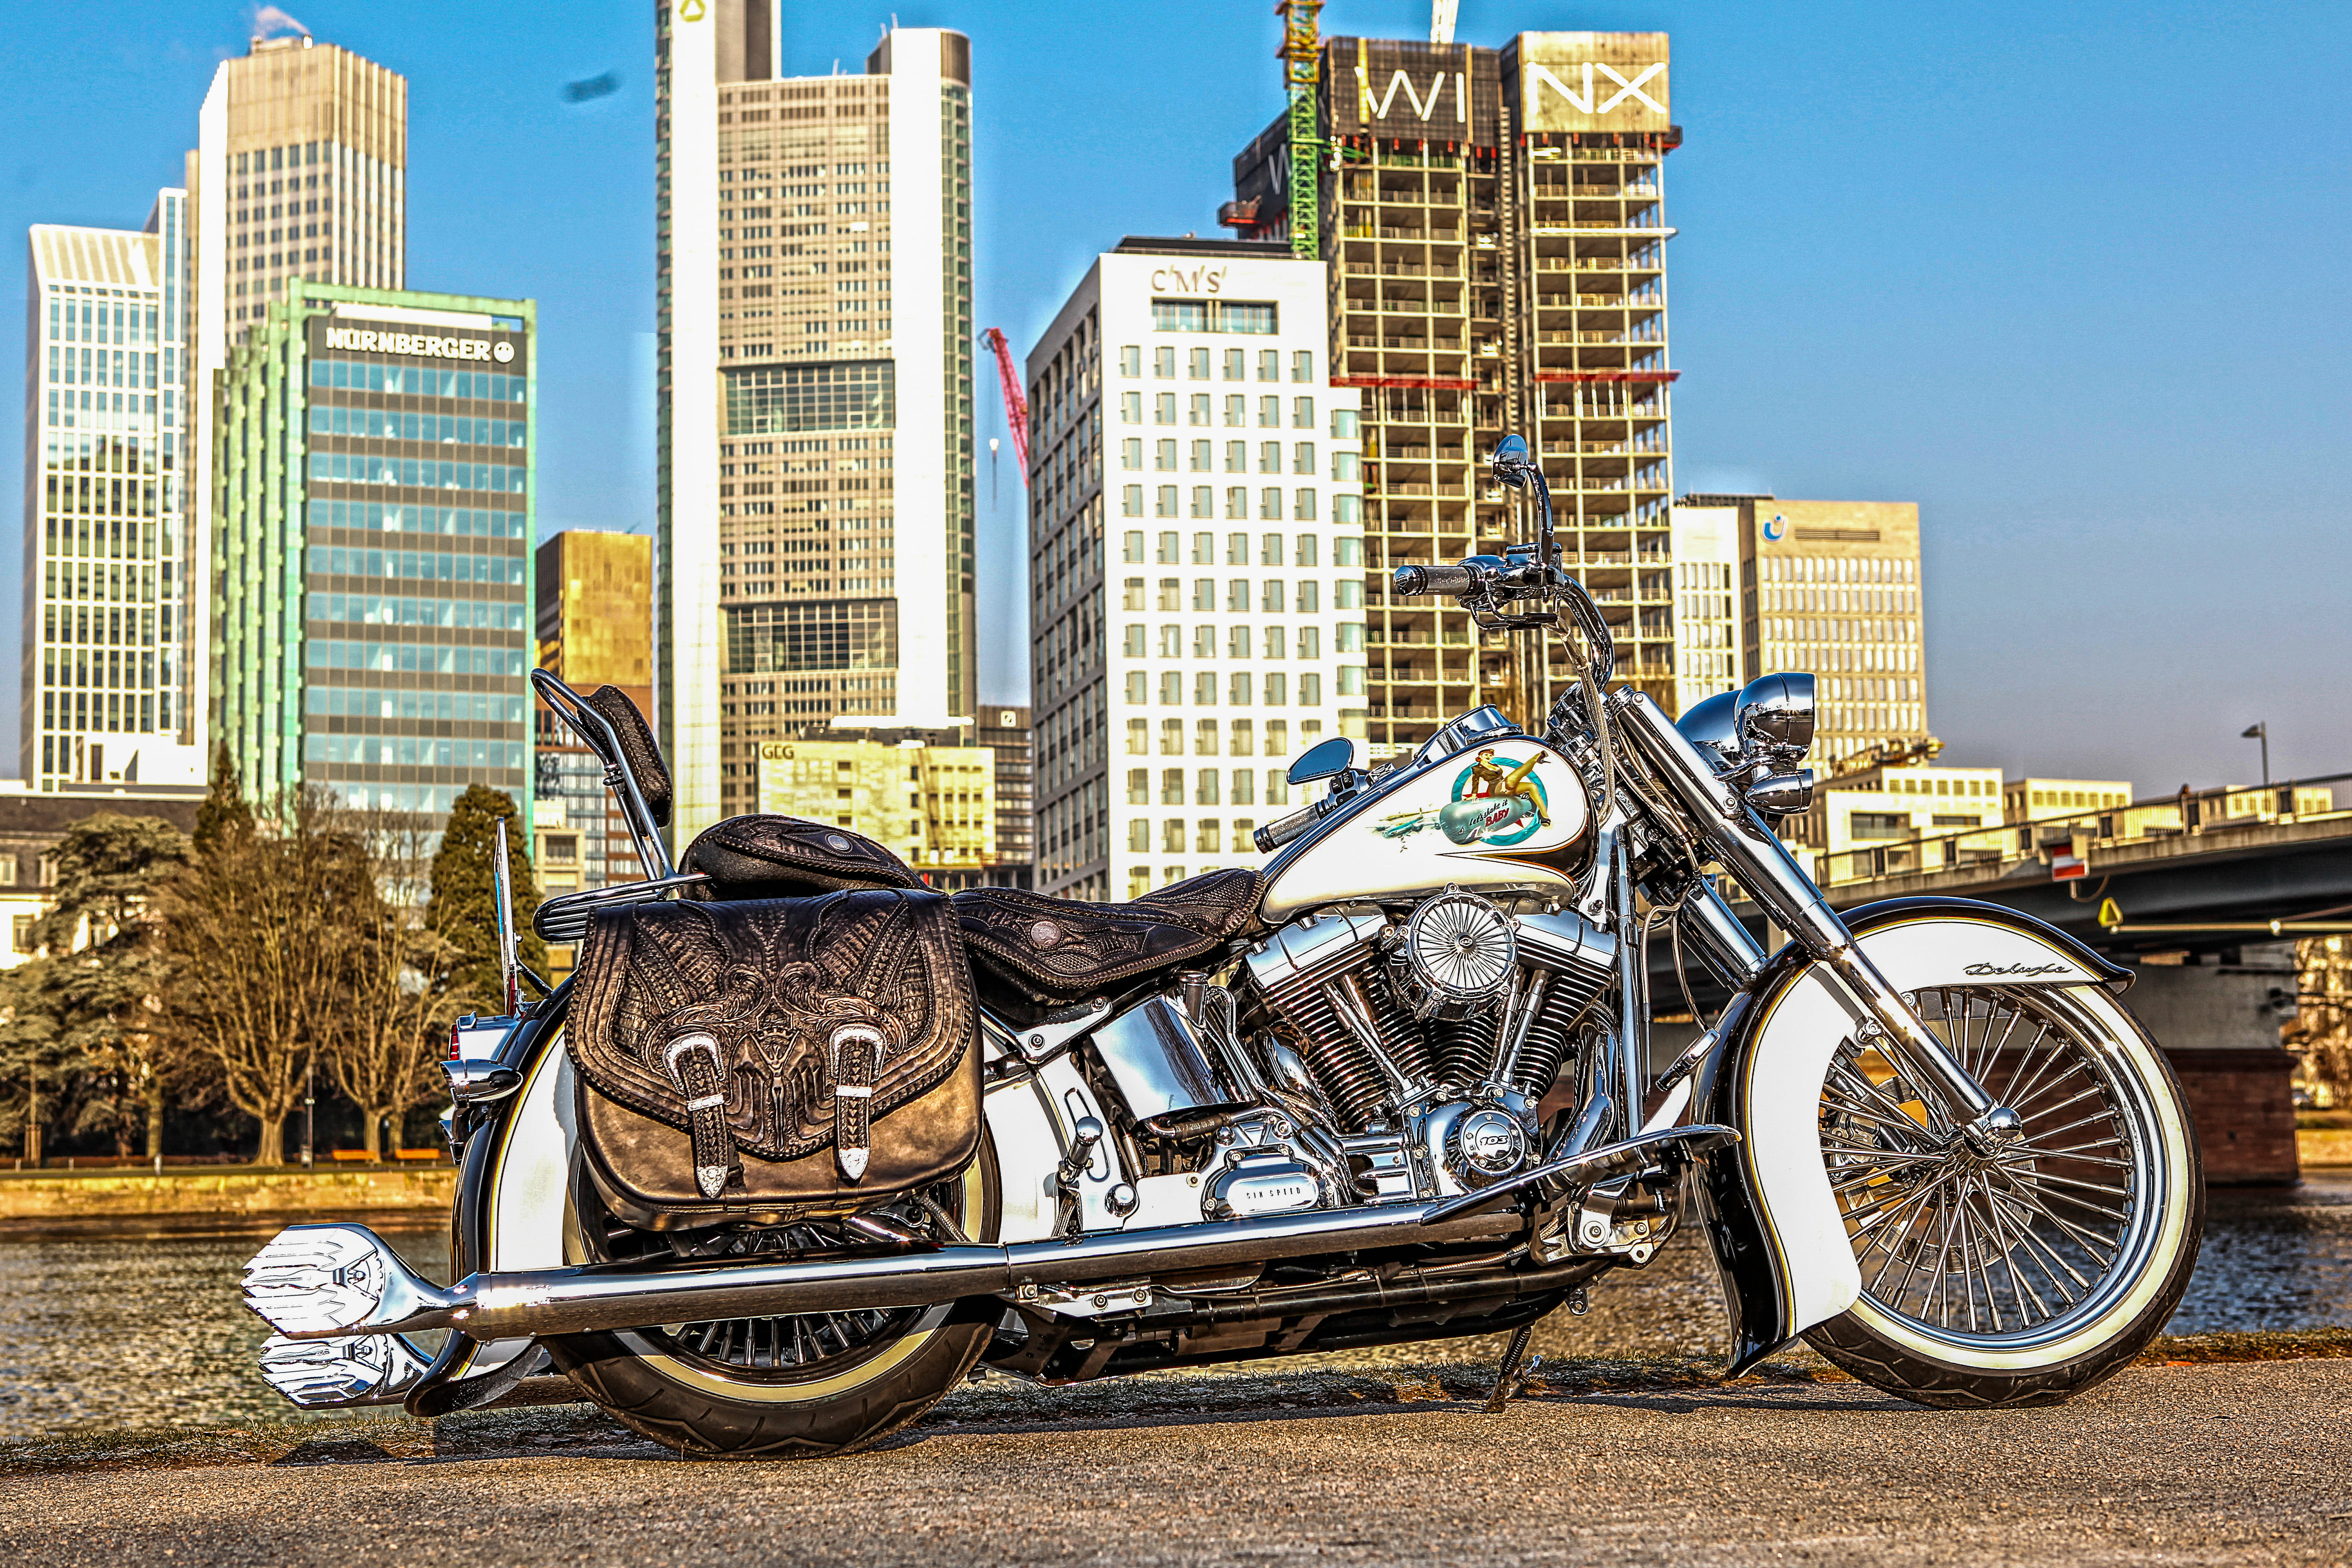 2015 FLSTN Softail Deluxe Mexican Chicano Style Umbau by BSB Customs  ab 480 EUR finanzieren*